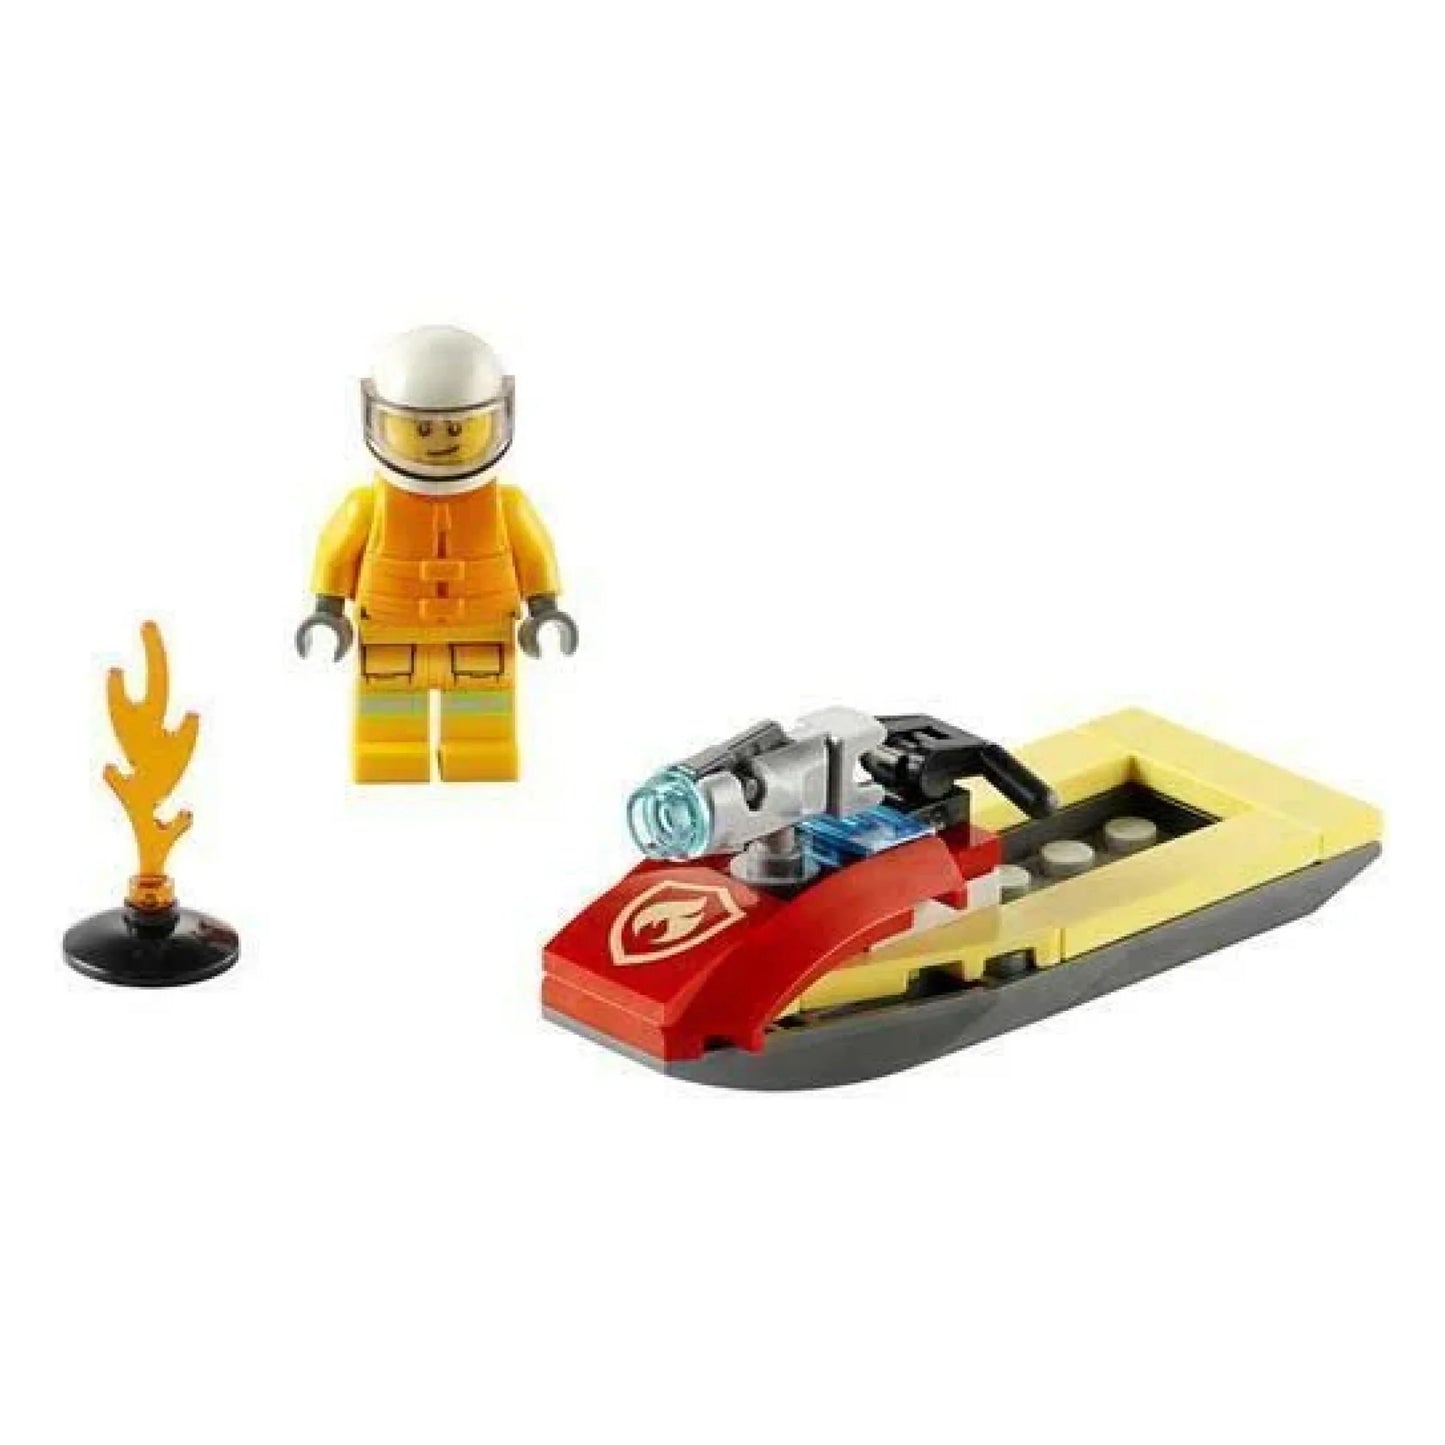 Lego City Fire Rescue Water Scooter 30368 Polybag